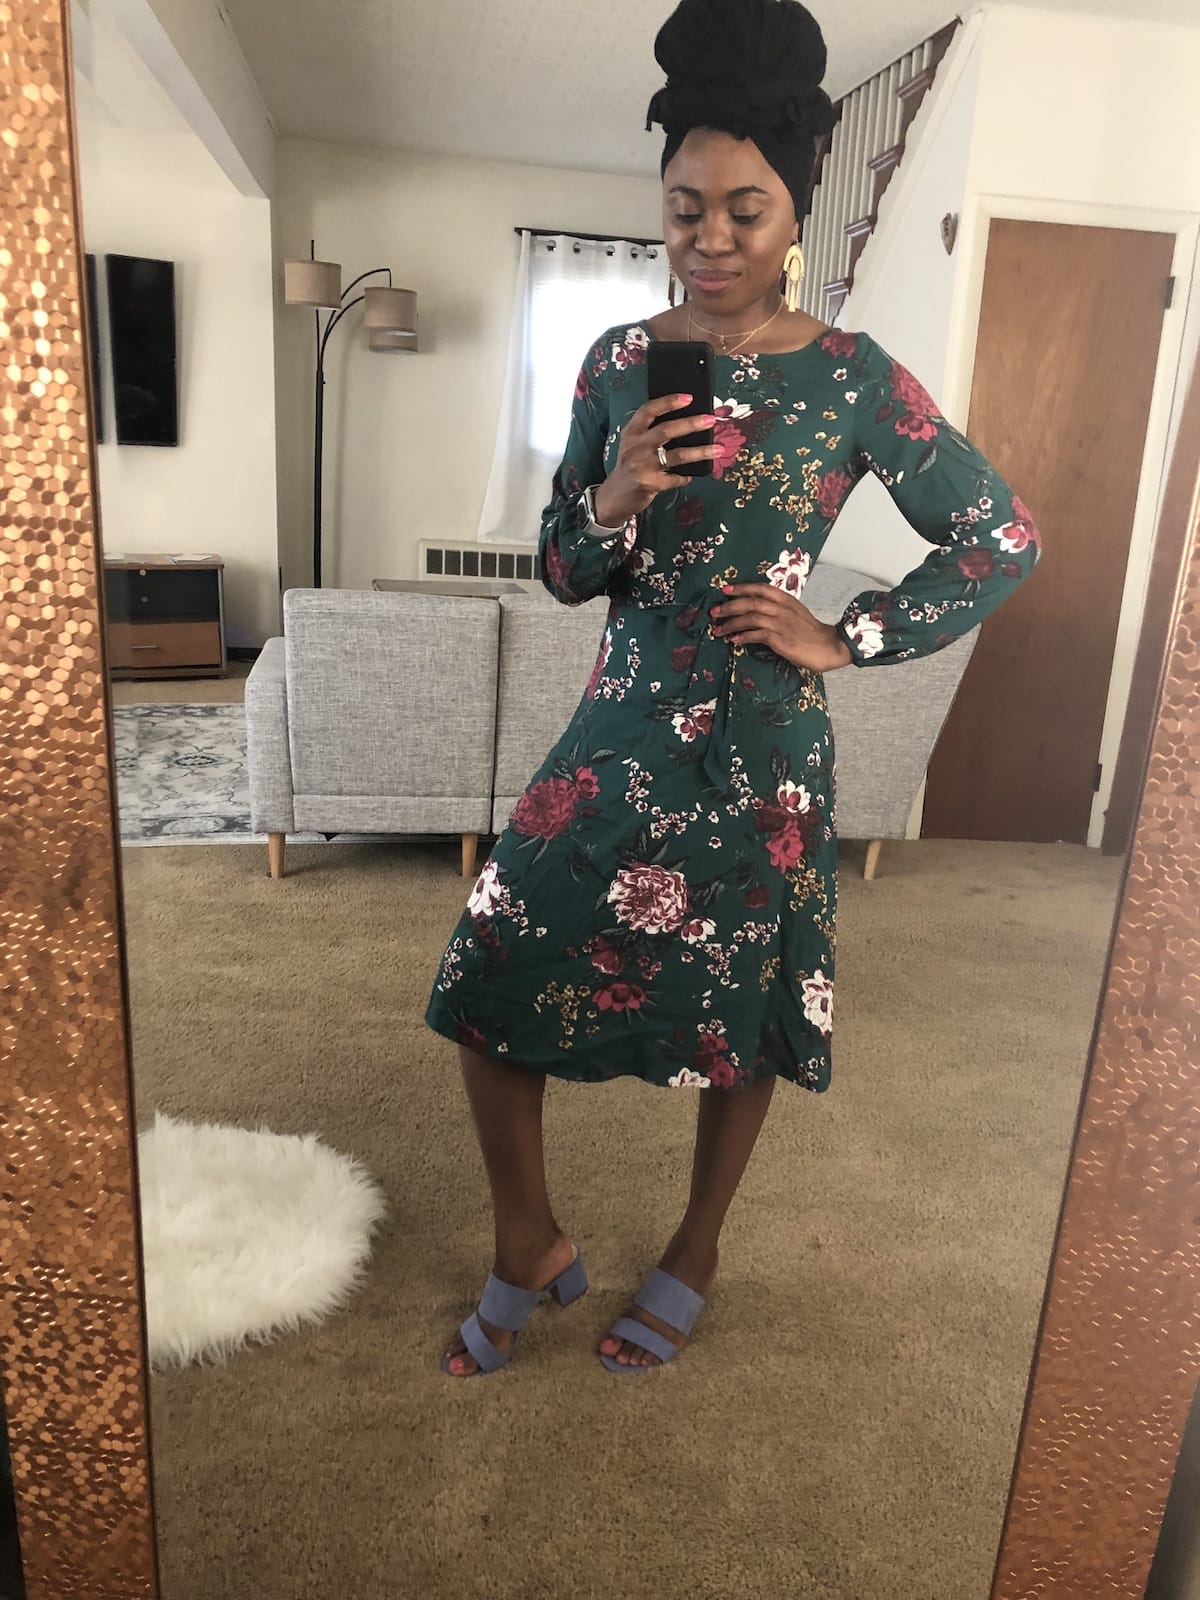 A side by side comparing wearing a JustFab Belted Blouson Sleeve Dress. Is JustFab a scam? Here's my honest review after spending my hard-earned money shopping for dresses and shoes on JustFab.